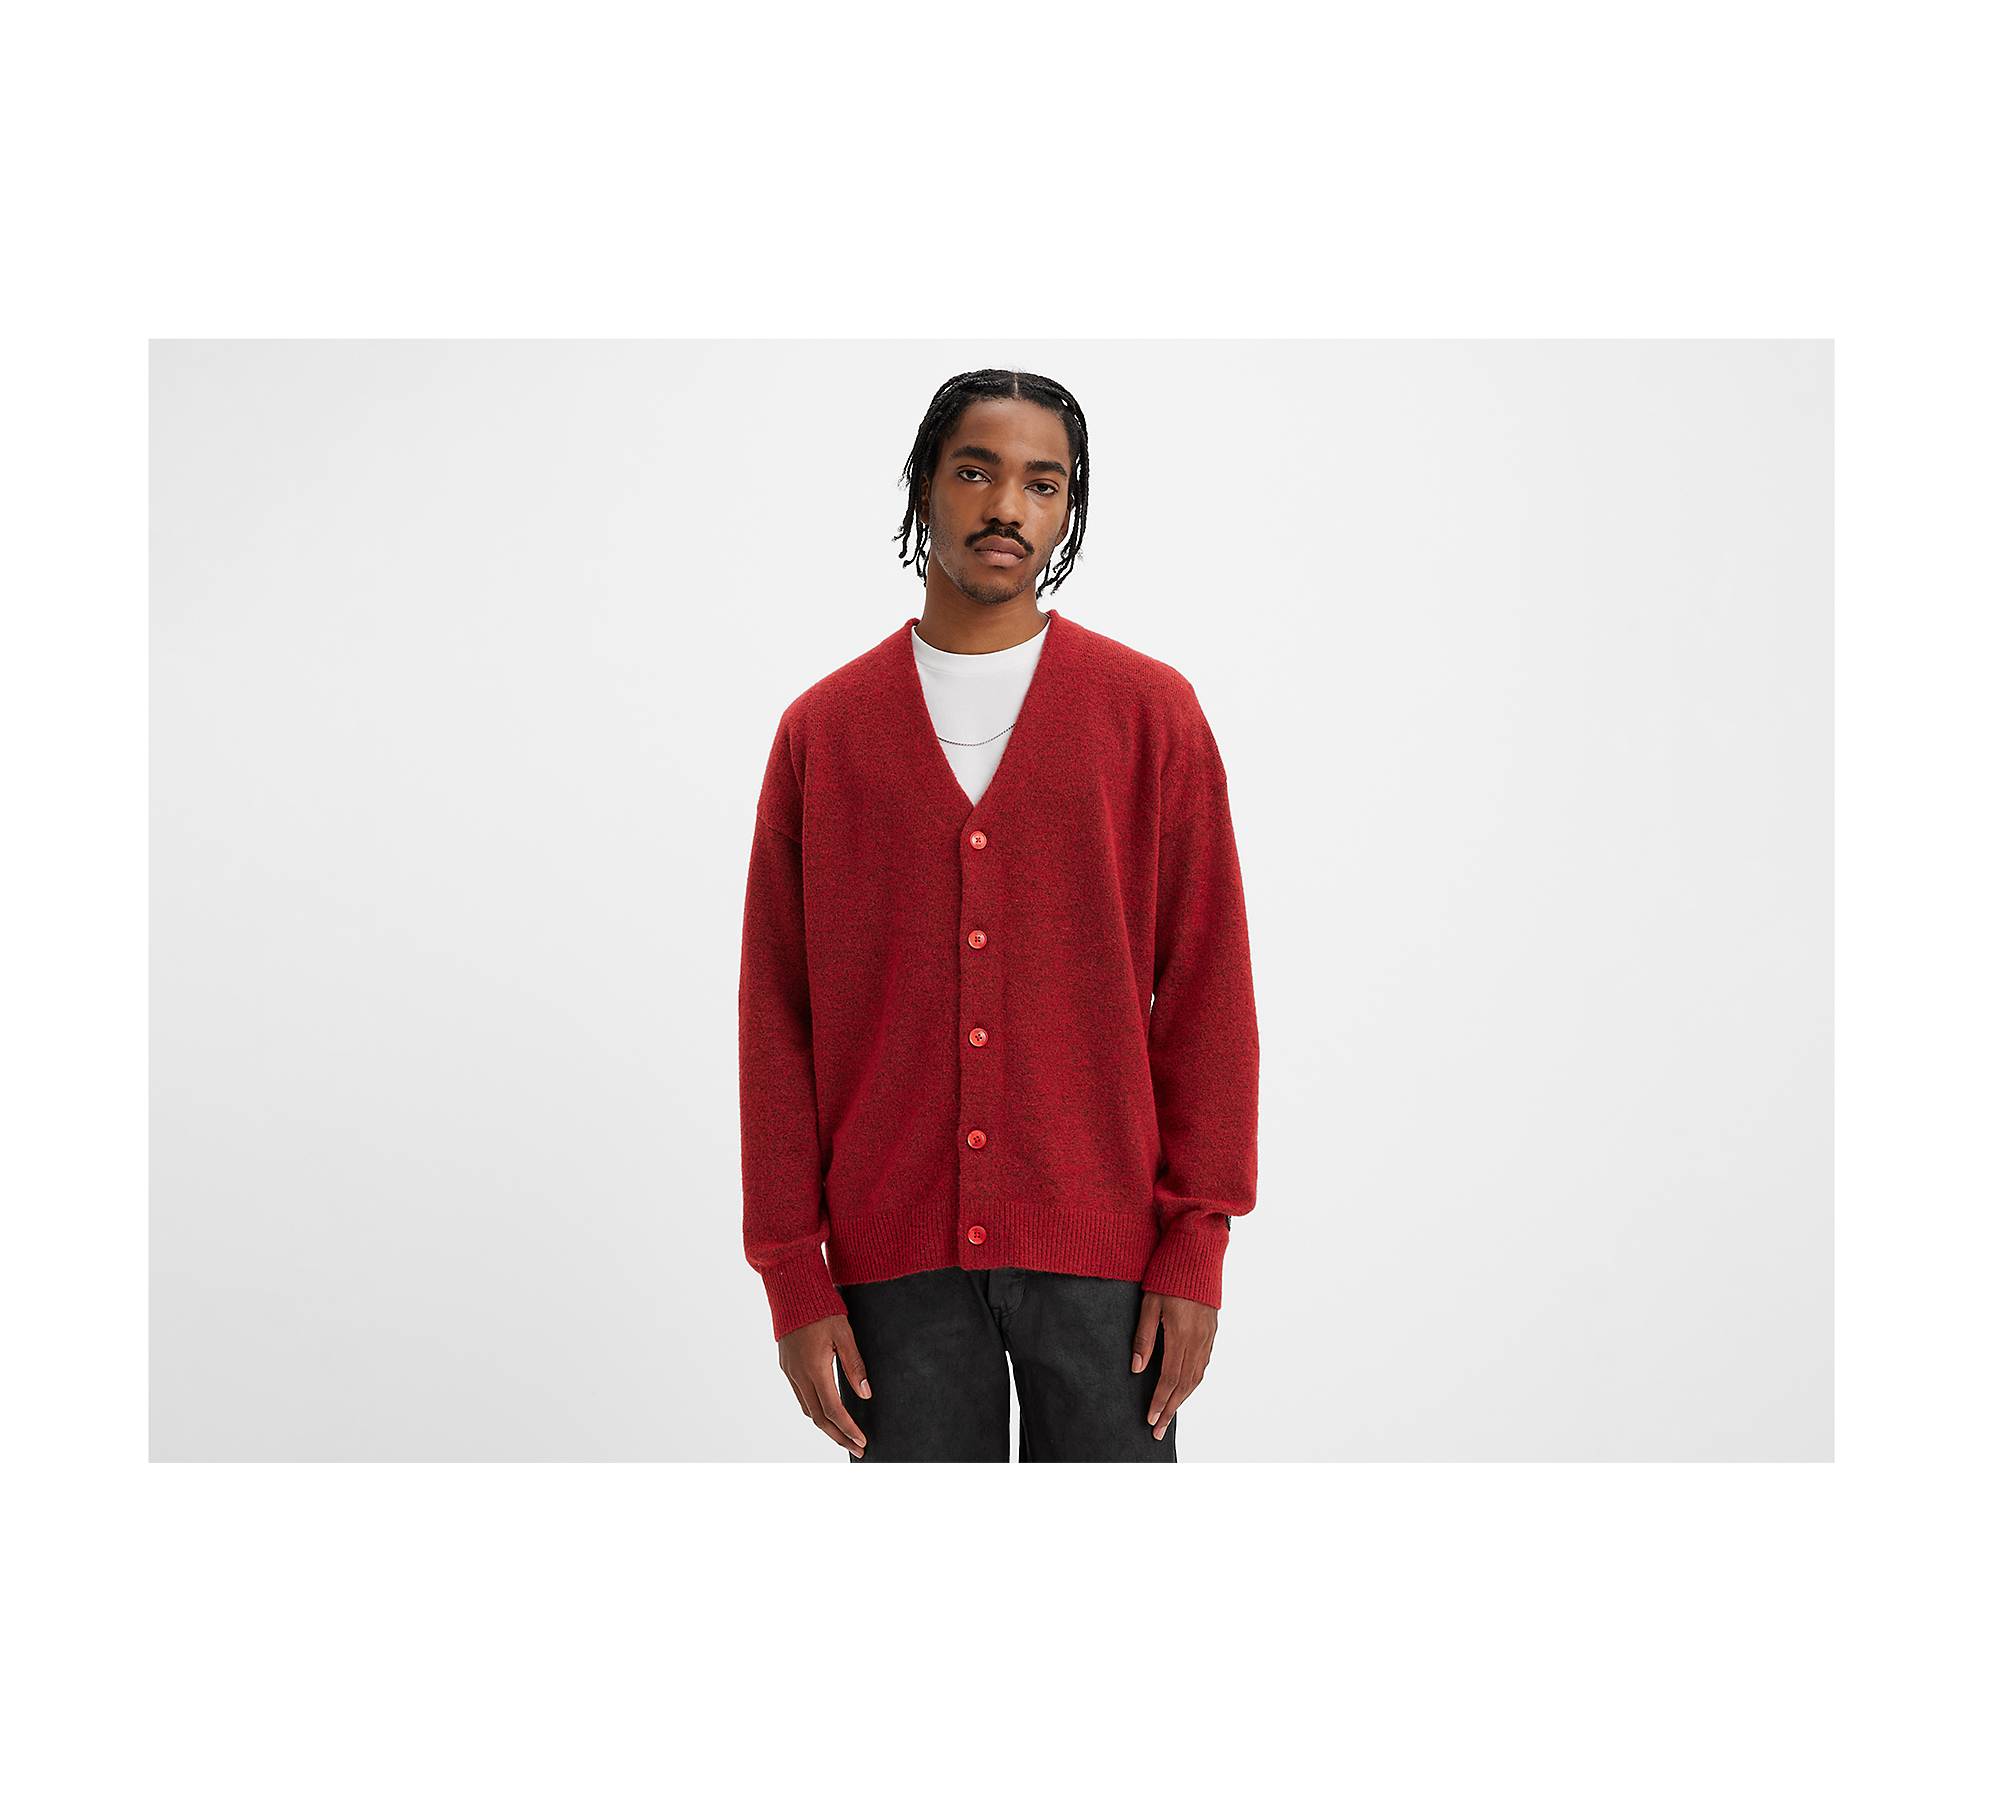 Women's Sweaters & Cardigans on Sale, Up to 50% off